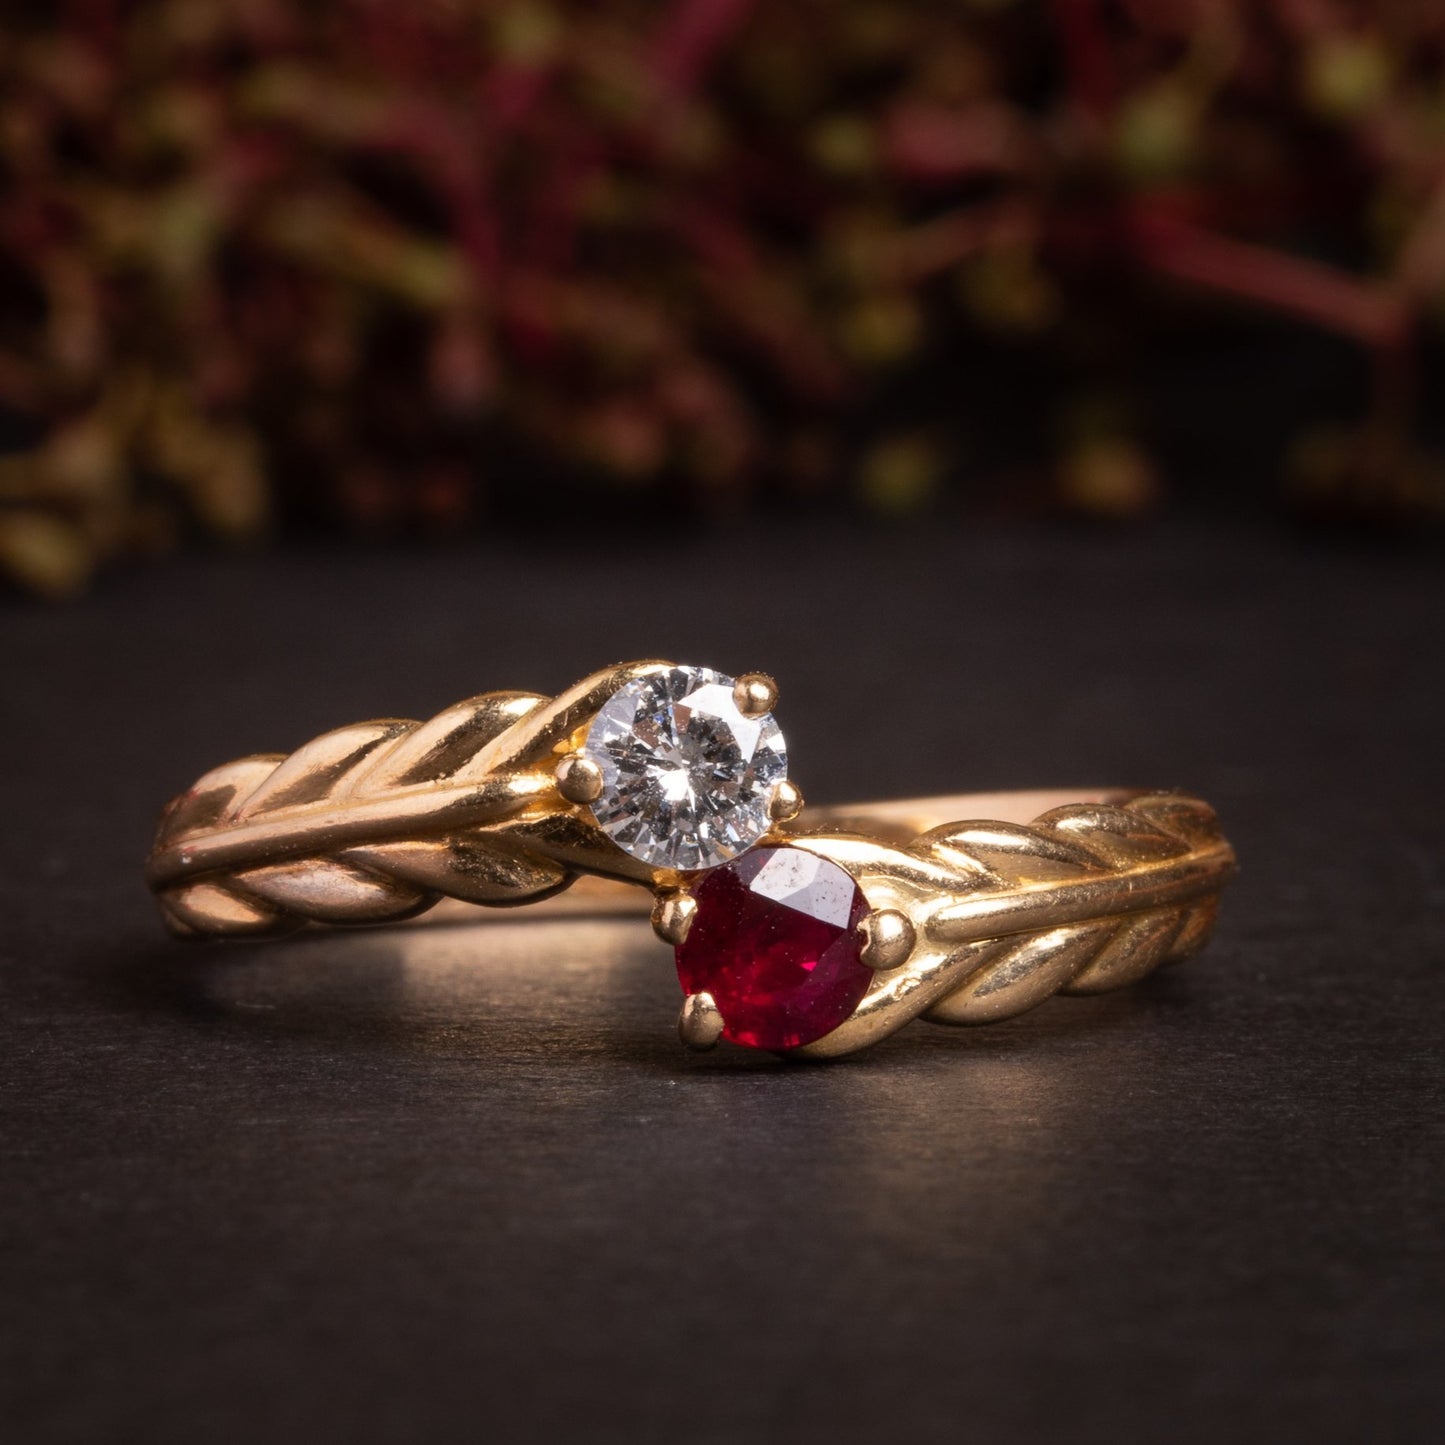 Vintage French Gold Toi et Moi Diamond and Ruby Ring